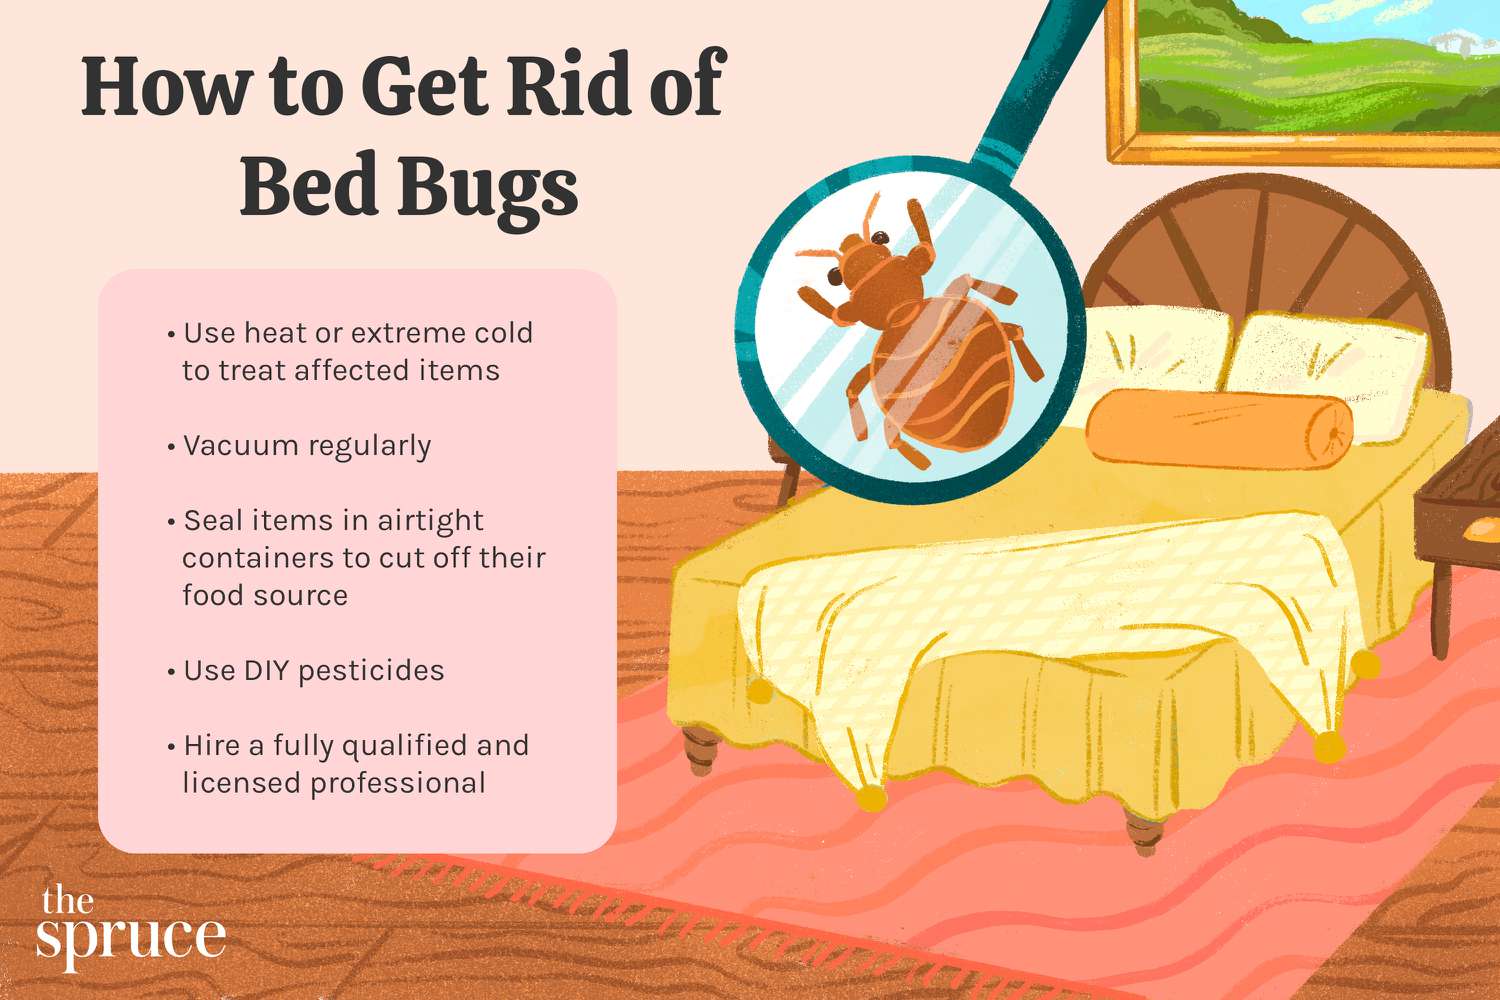 How to Keep Bed Bugs under Control?